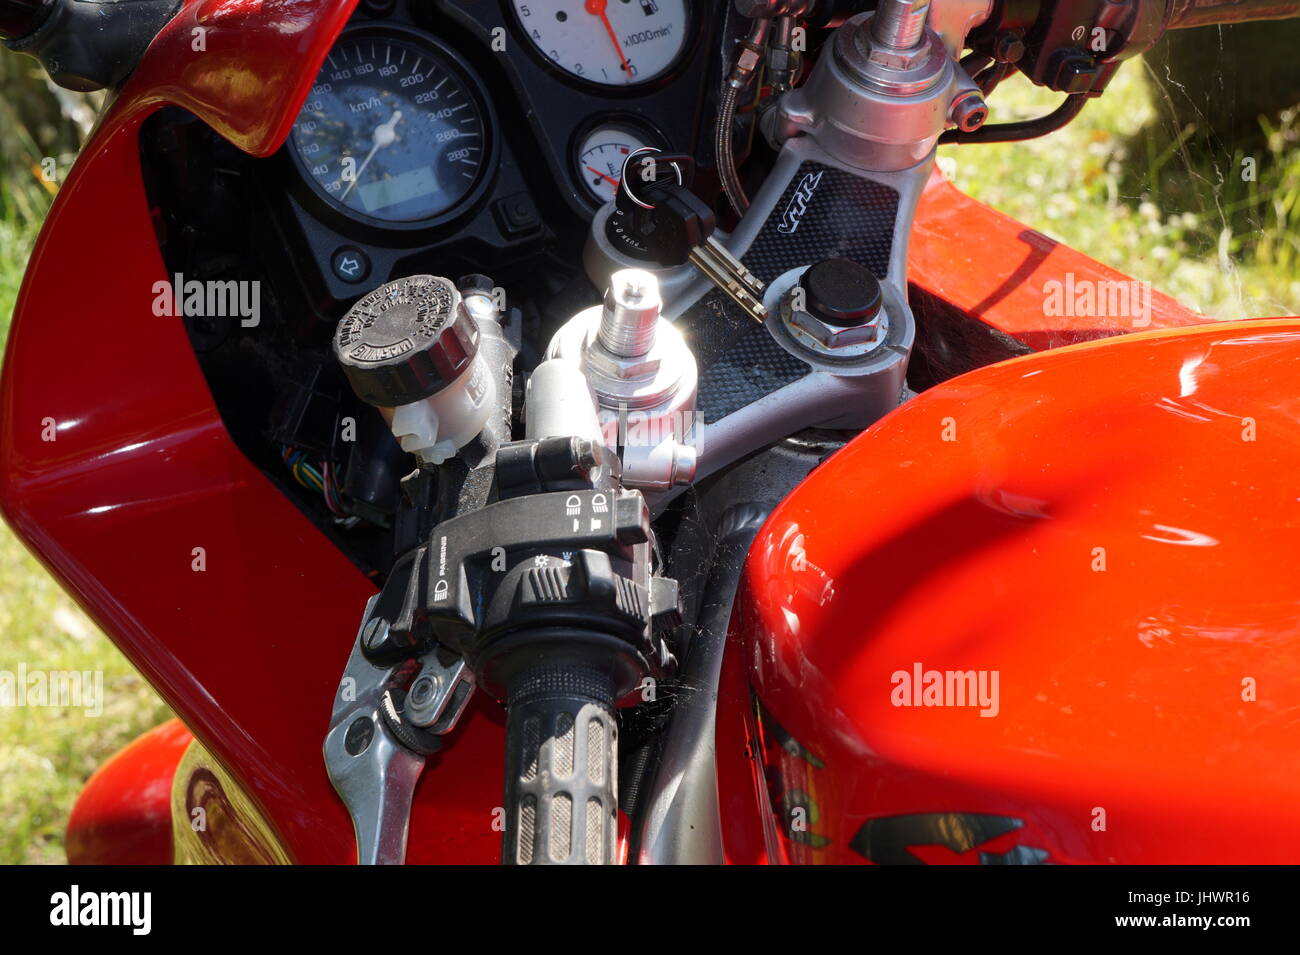 Honda Vtr 1000 Firestorm Superhawk This One Without The Snail Stock Photo Alamy